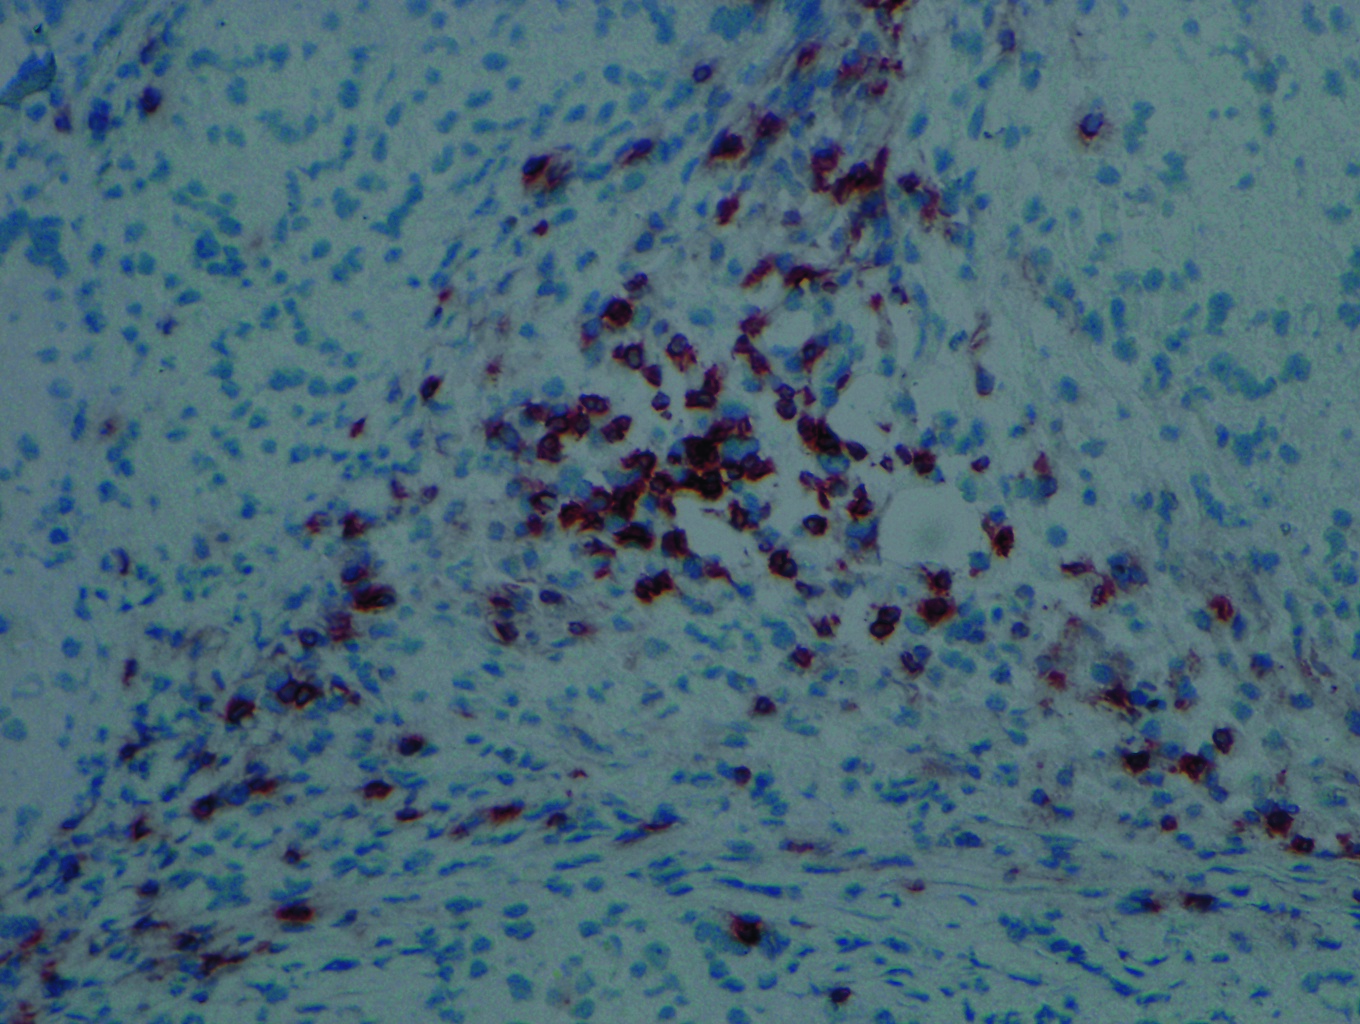 An infiltration of T cells, shown by dark brown colour, can be seen in the tissues formed by iPSCs.